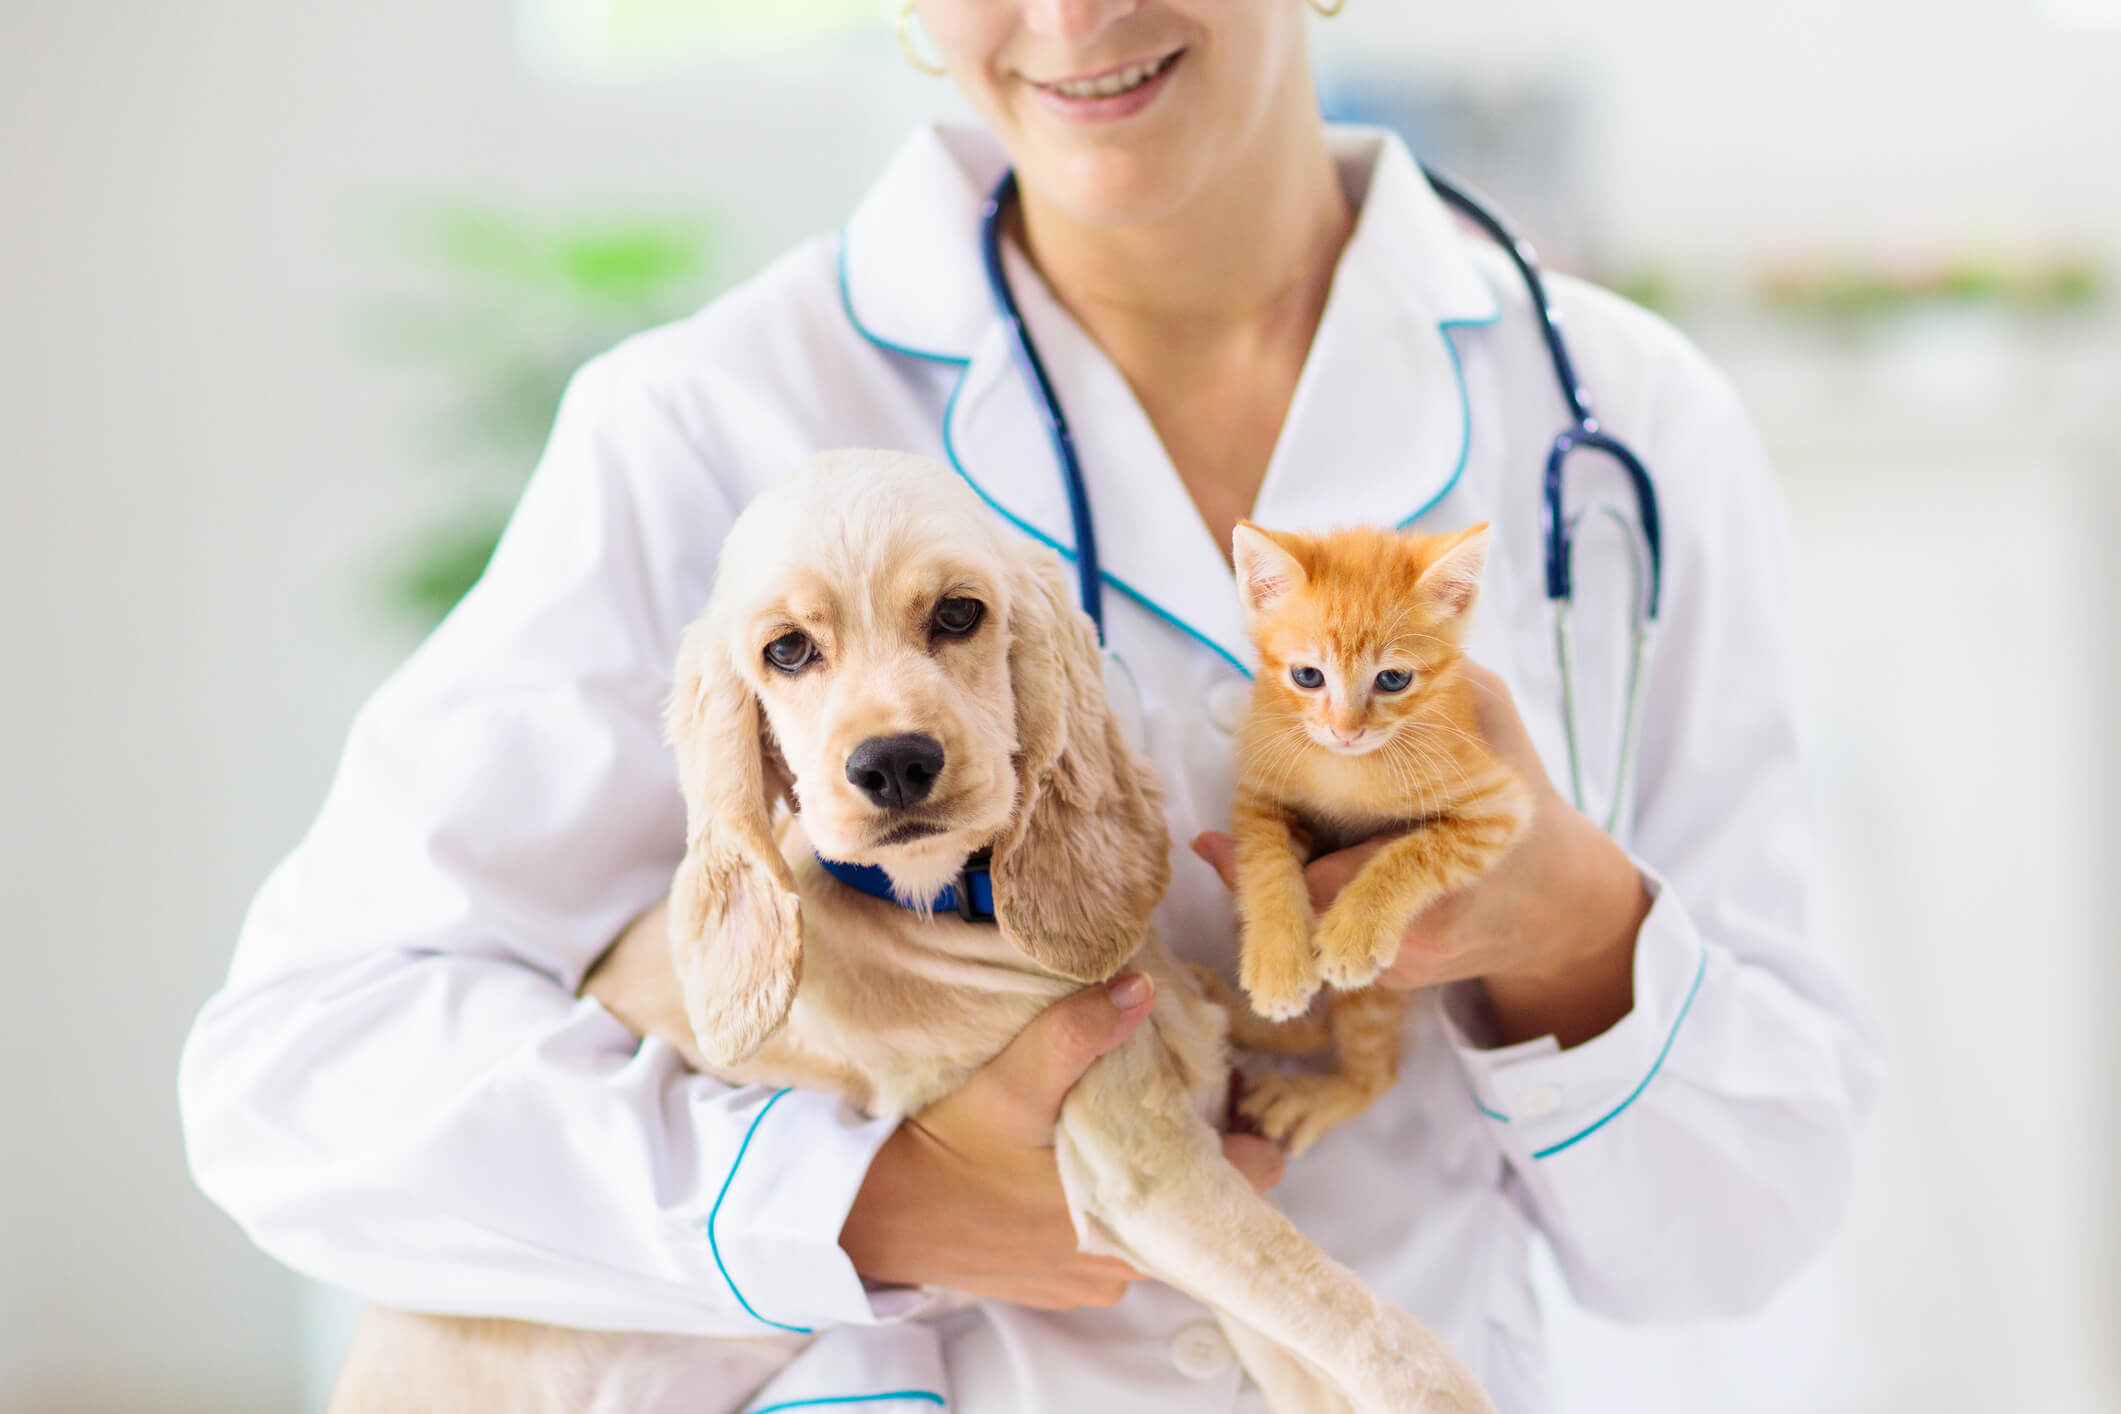 Pet Care Professionals' Insurance: Types of Coverage